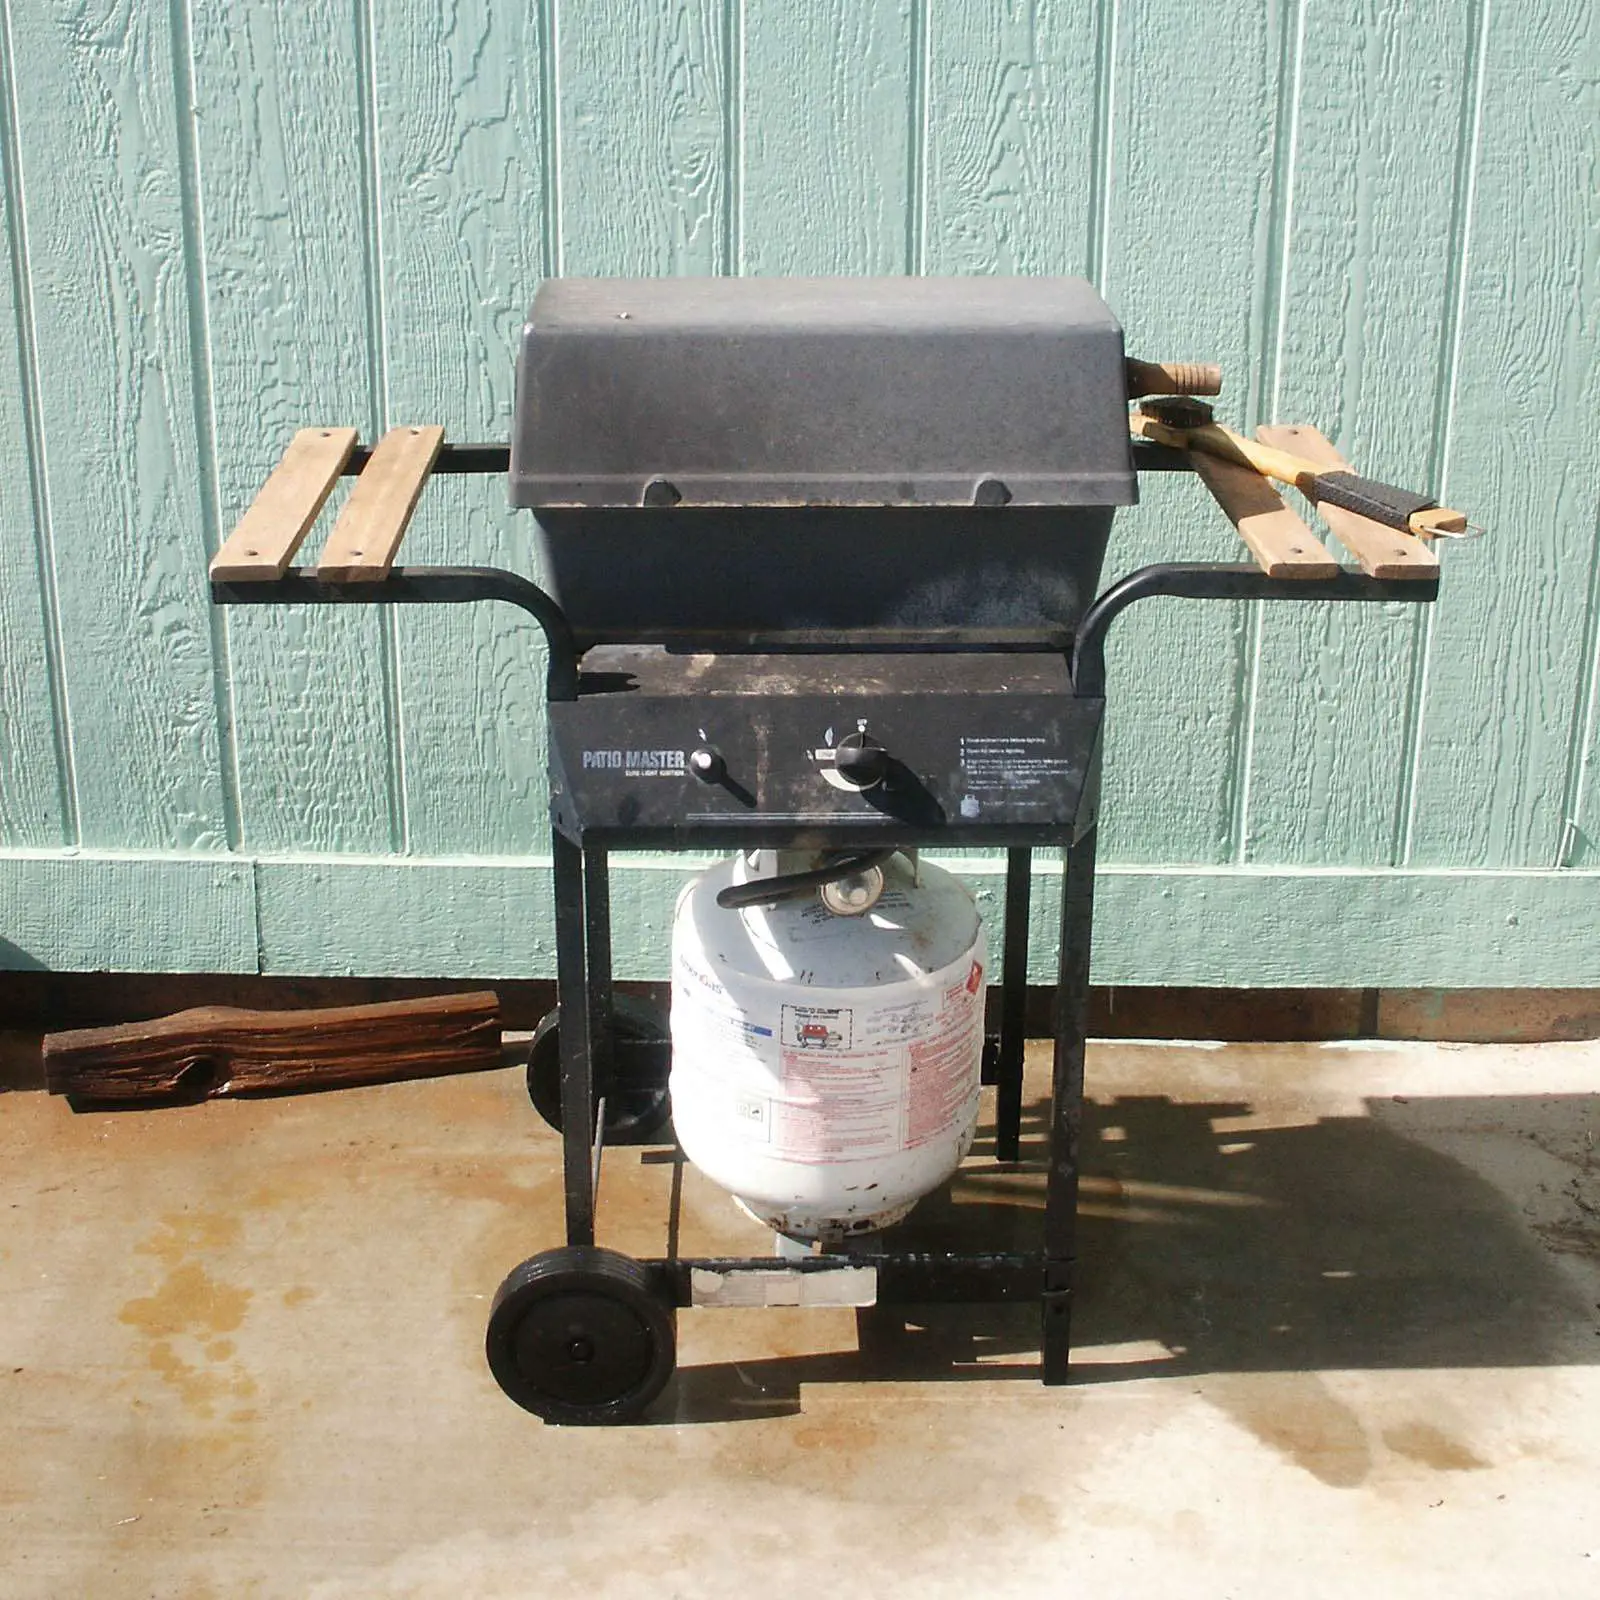 How to Dispose of an Old BBQ Grill